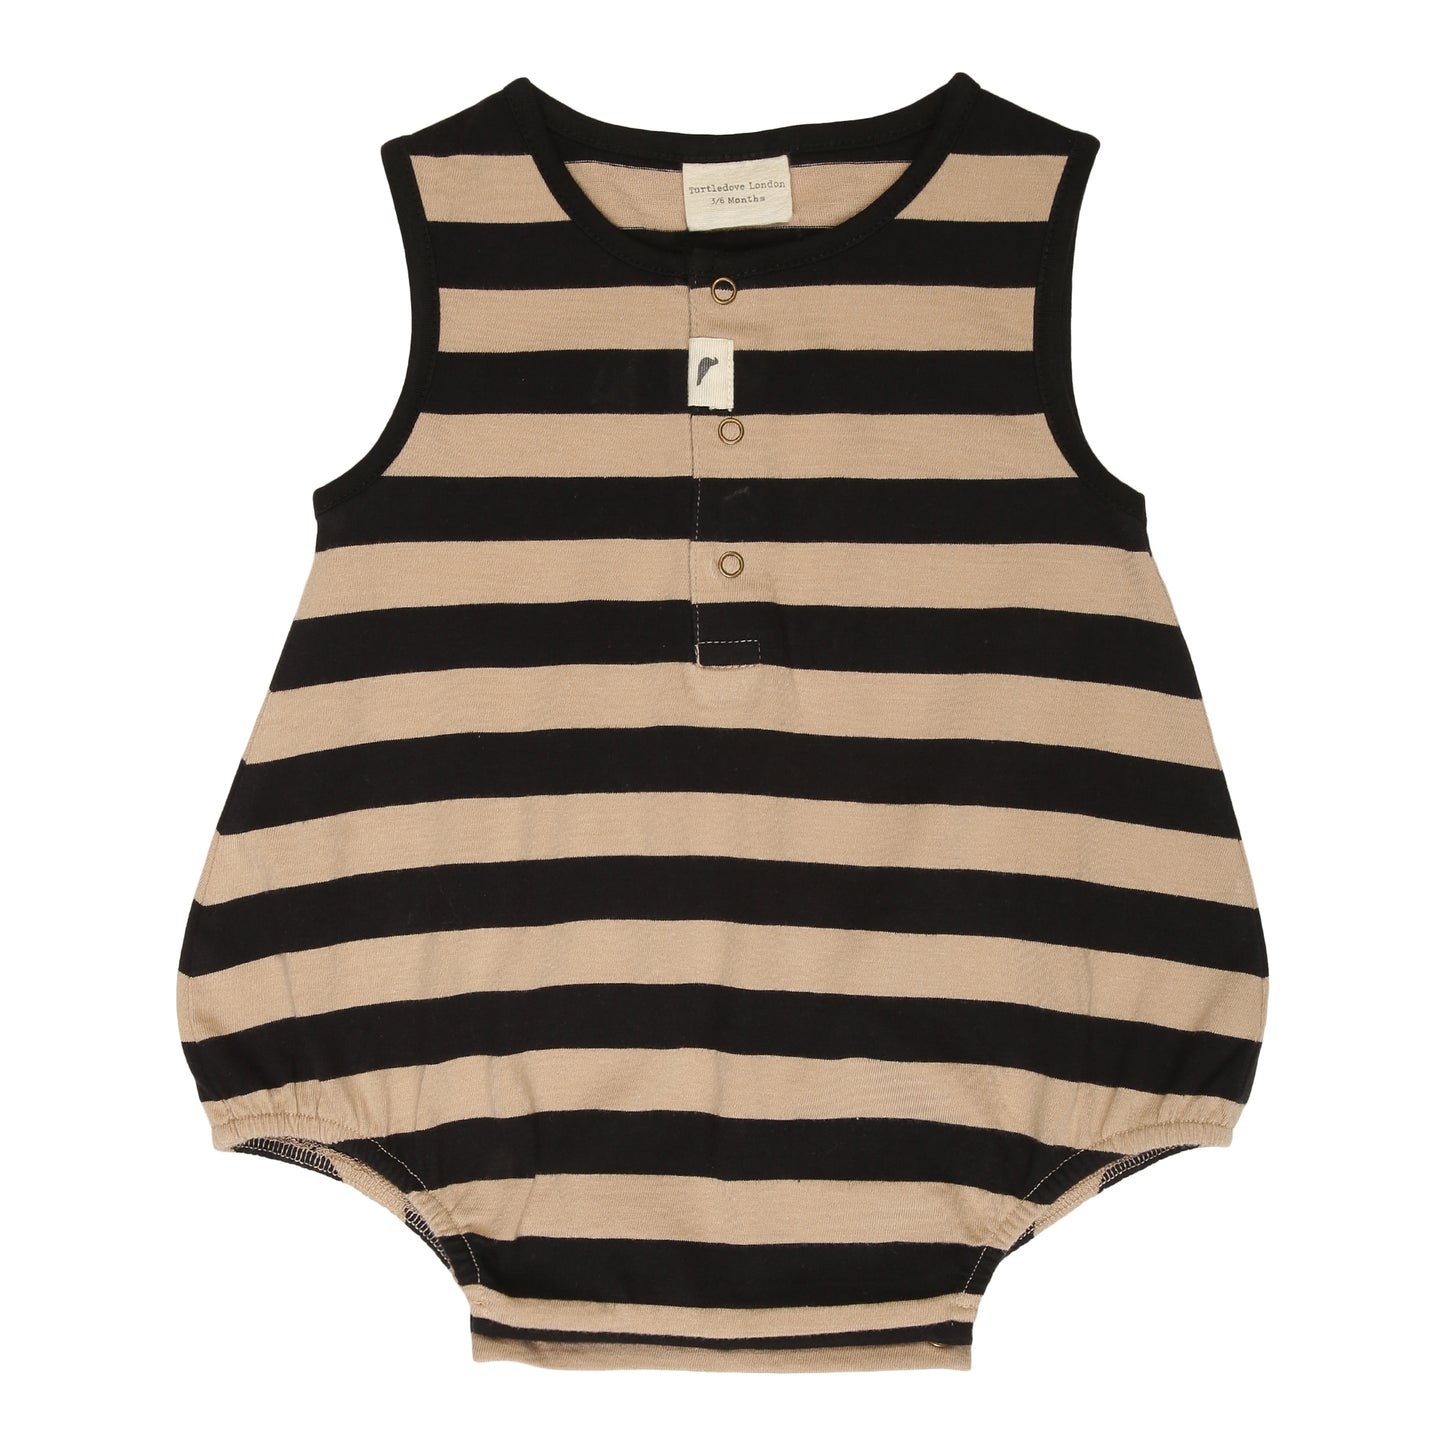 Turtledove Wide Stripe Bubble Romper is available at Alf & Co the children’s independent